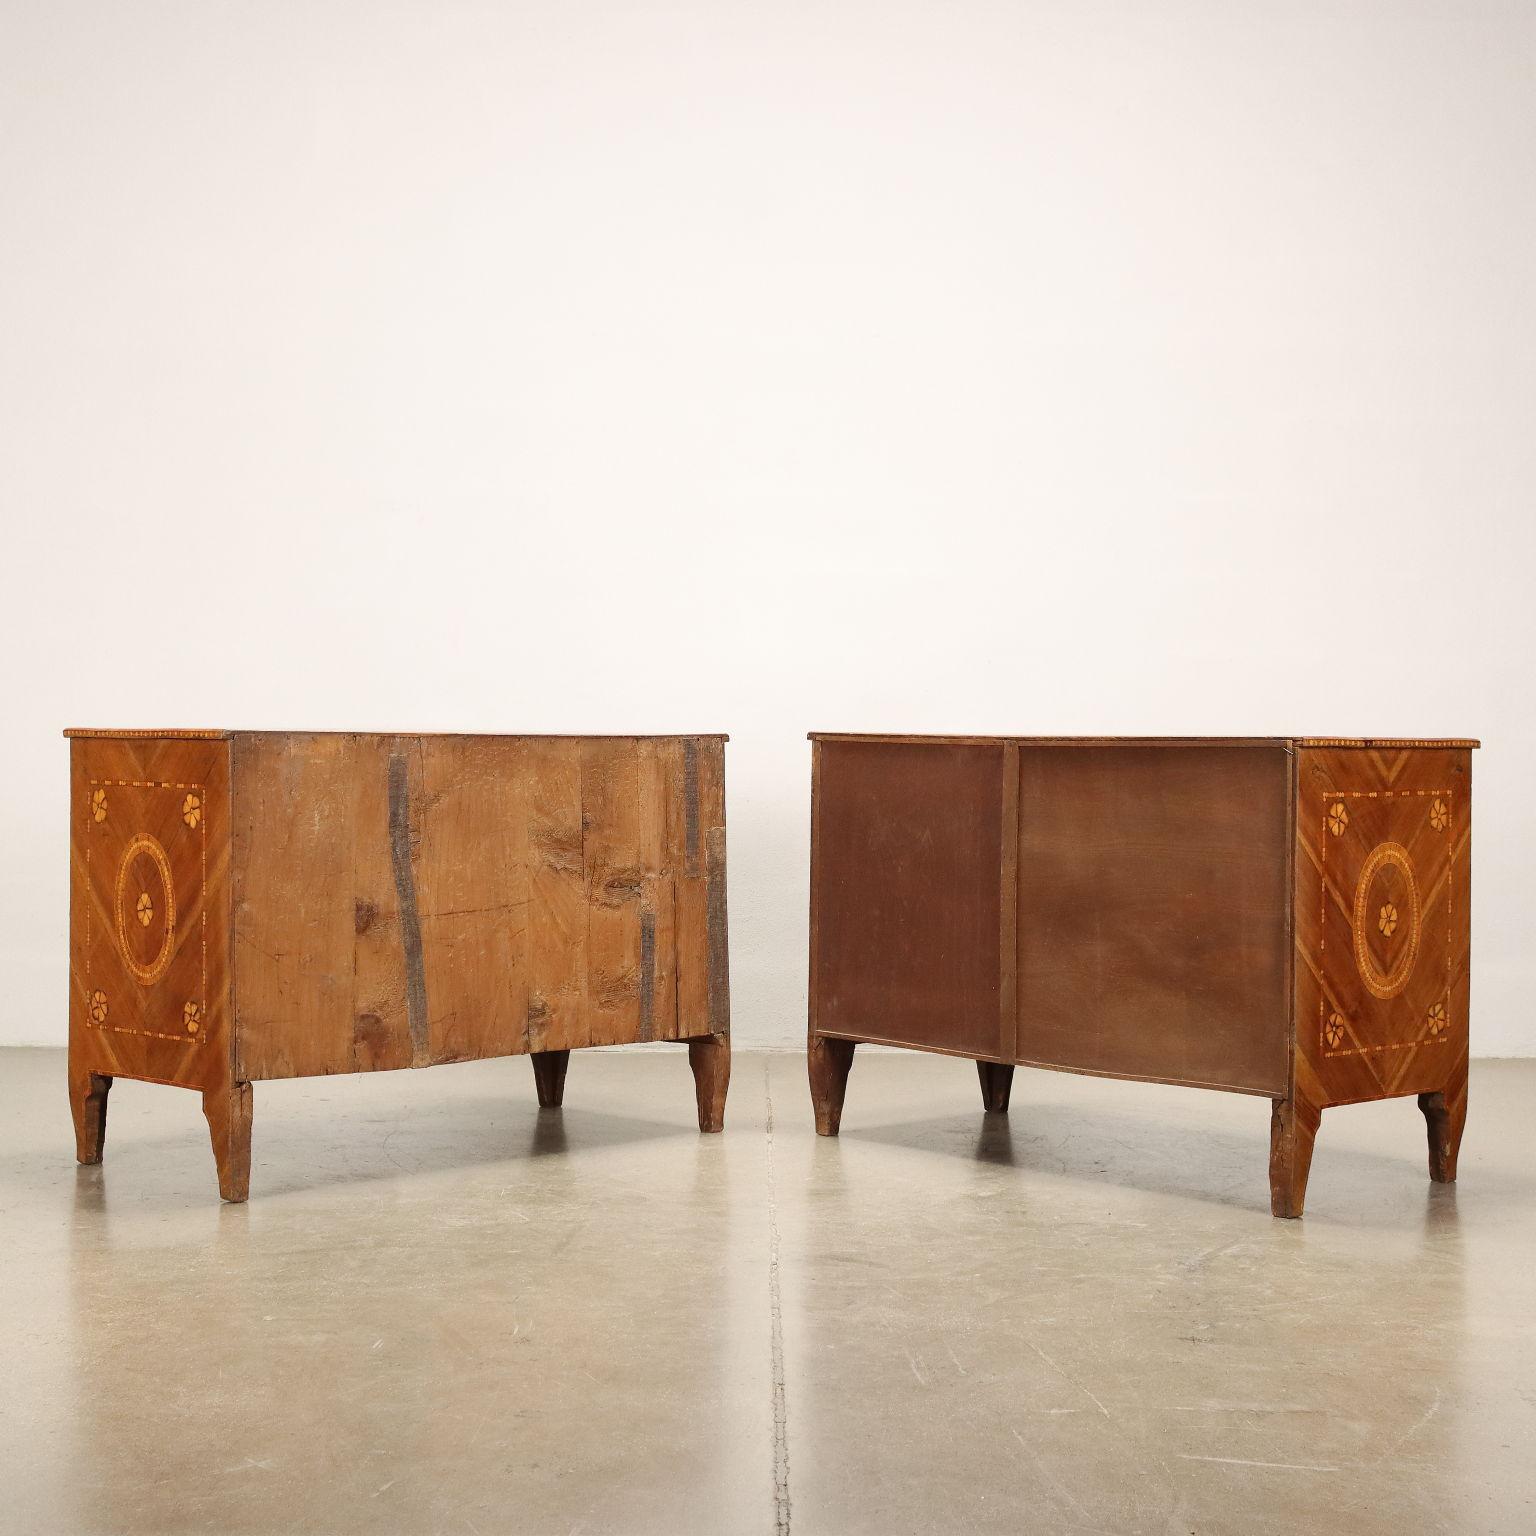 Pair of Louis XVI Chests of Drawers, Piacenza, Late 18th Century For Sale 8